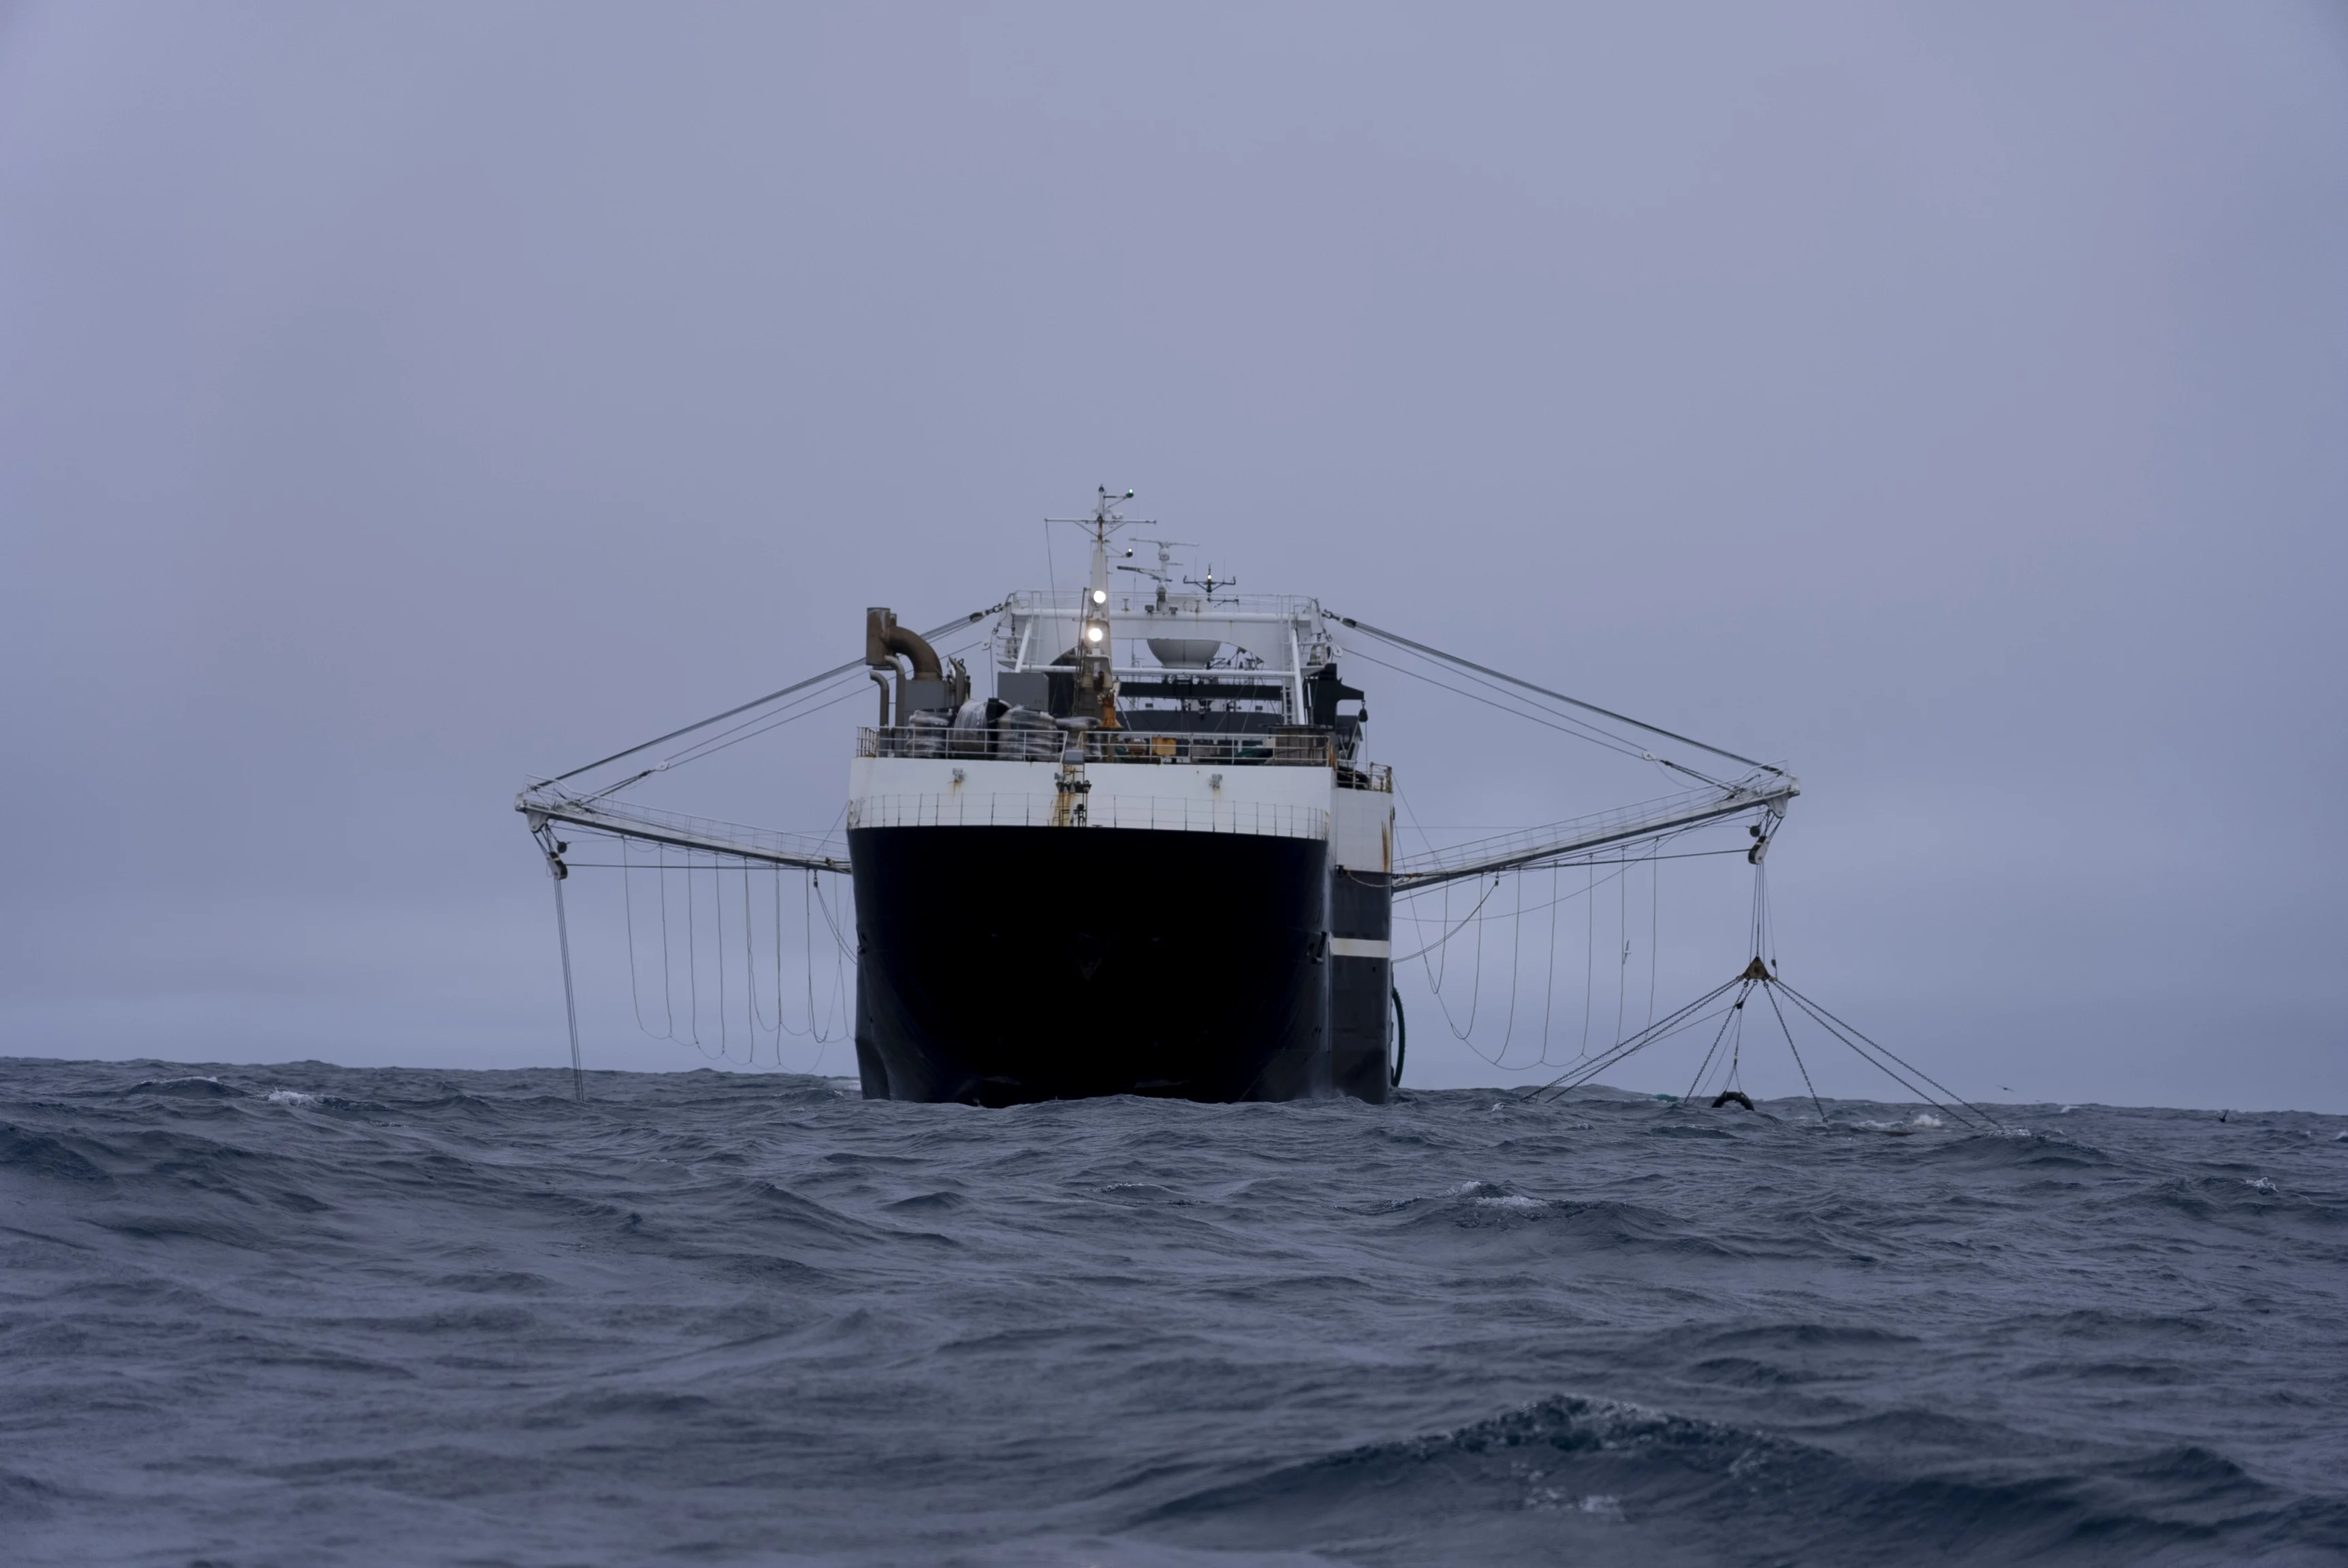 The Norwegian Aker BioMarine’s Antarctic Sea trawls for krill in the Southern Ocean off the coast of the South Orkney Islands, north of the Antarctic Peninsula, on 10 March 2023. Photo: AP Photo / David Keyton